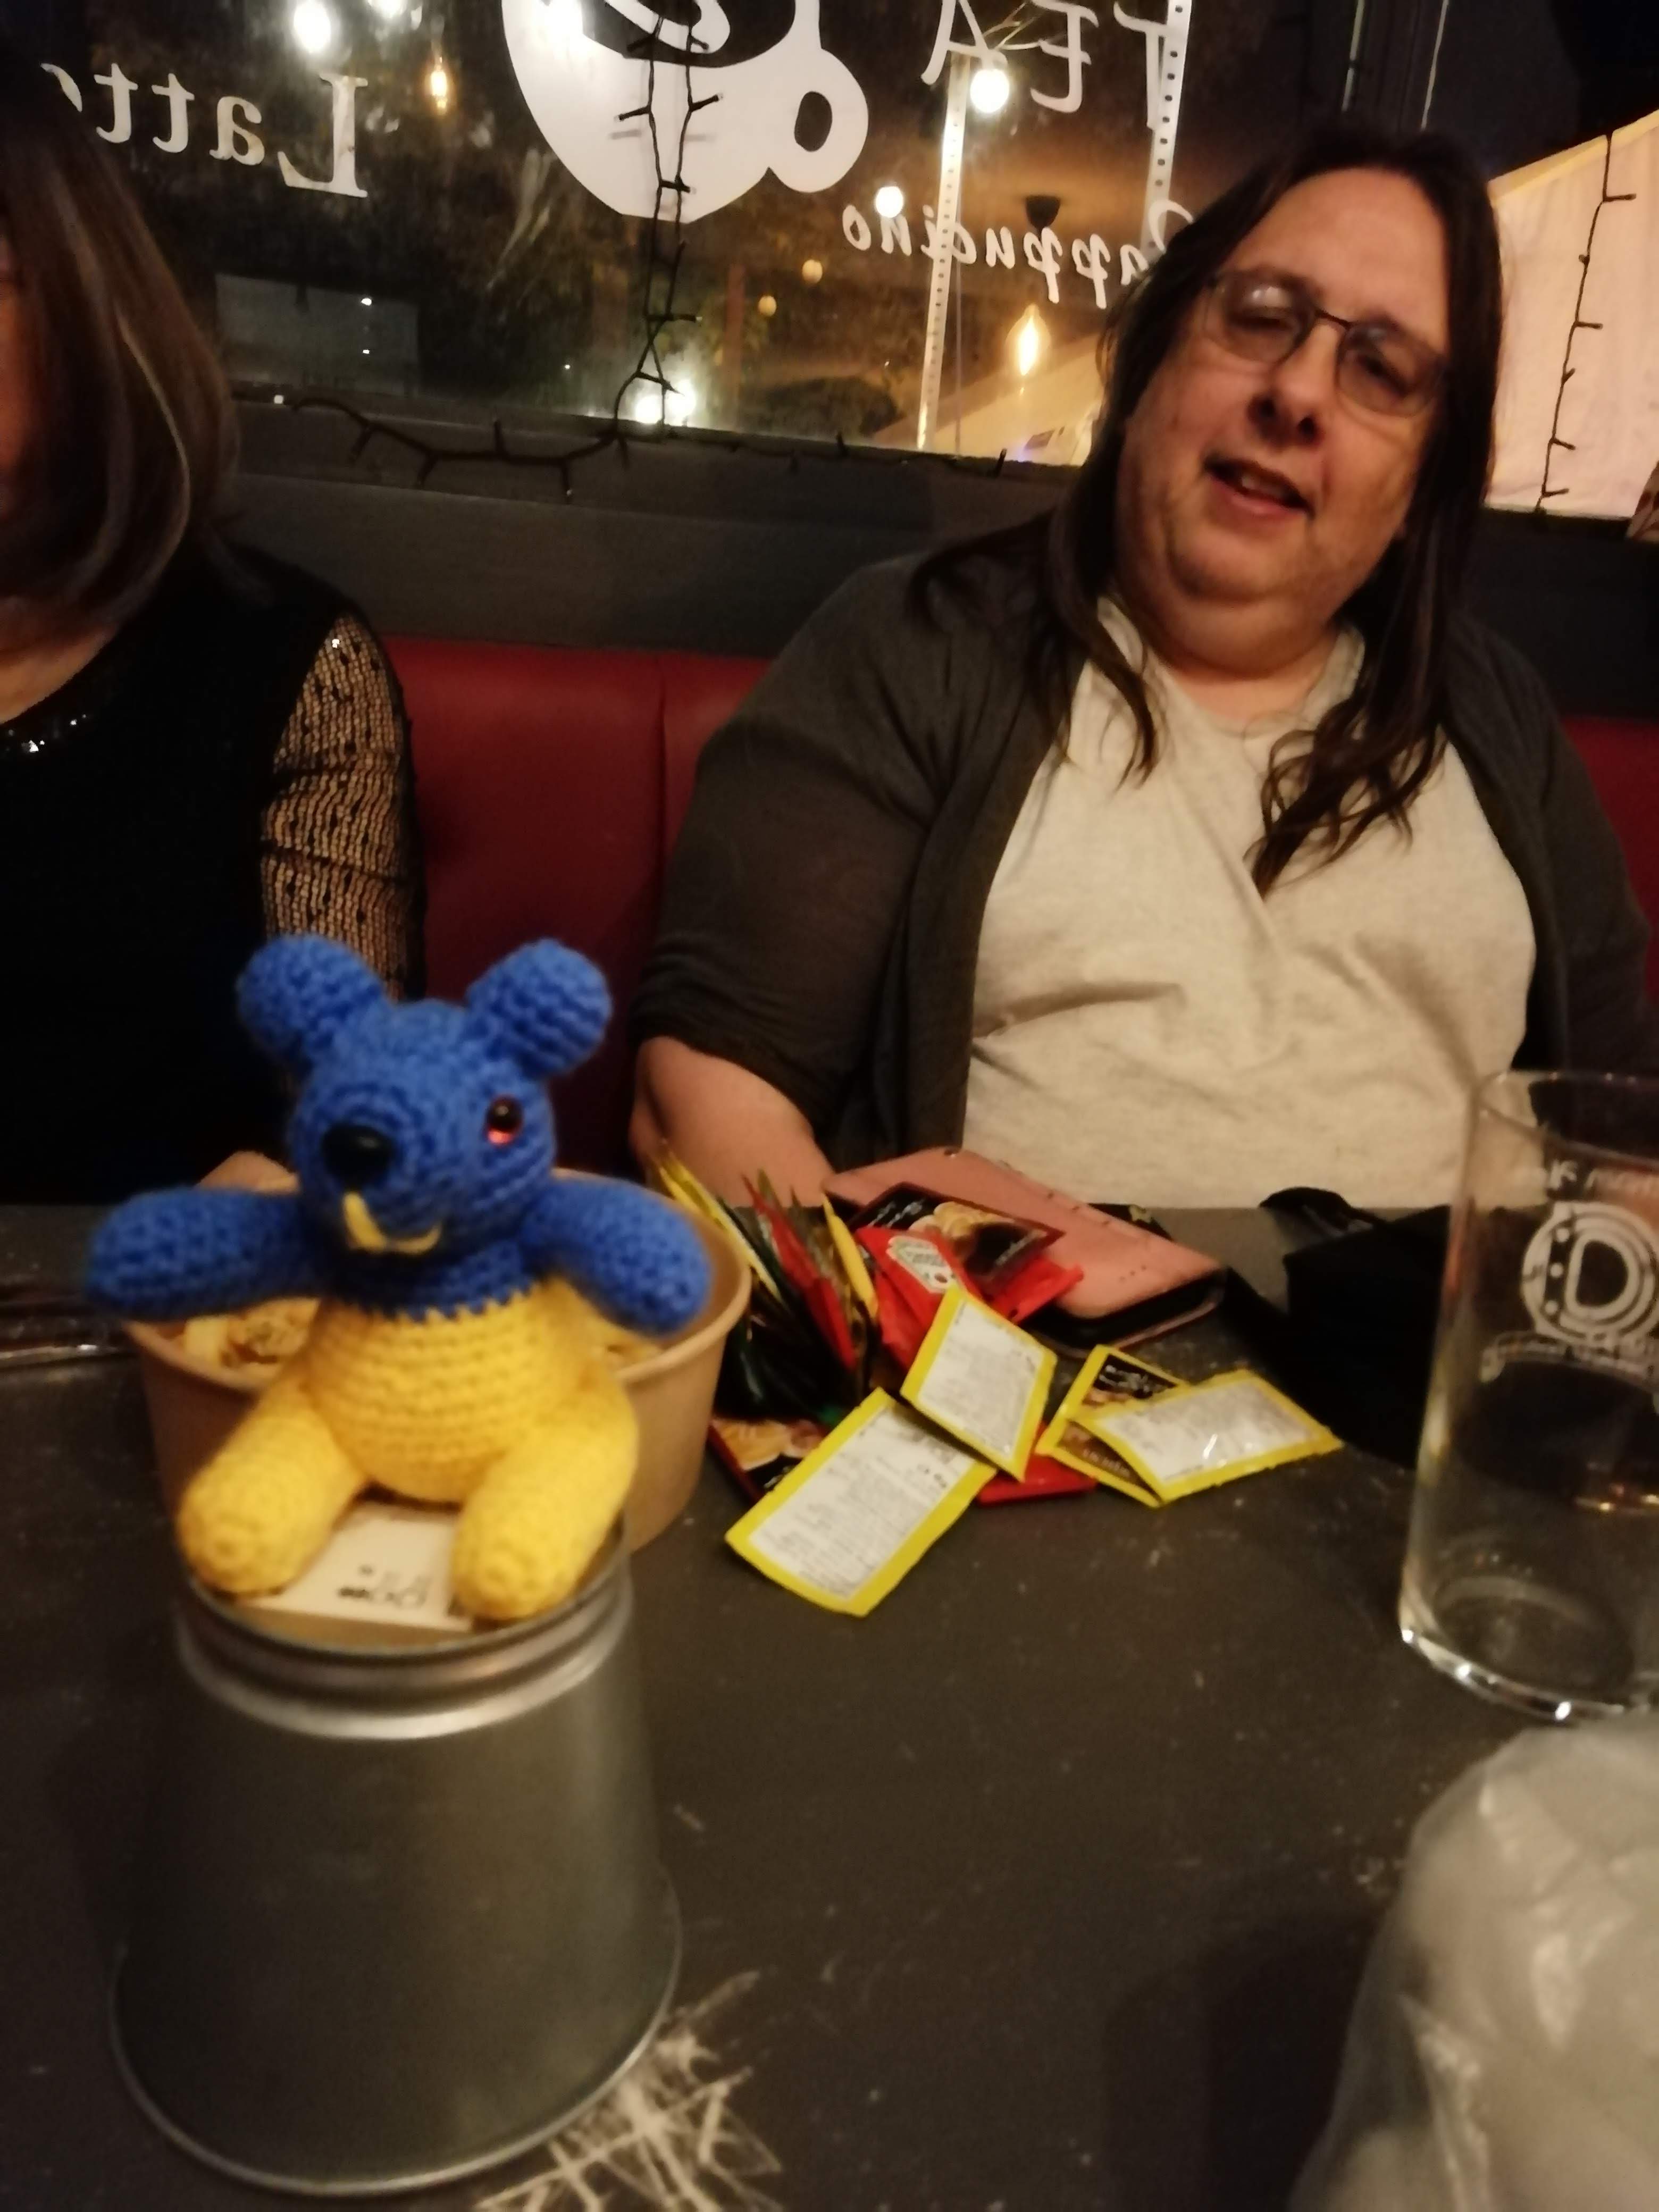 Blue and yellow panda on a table with Susan in background